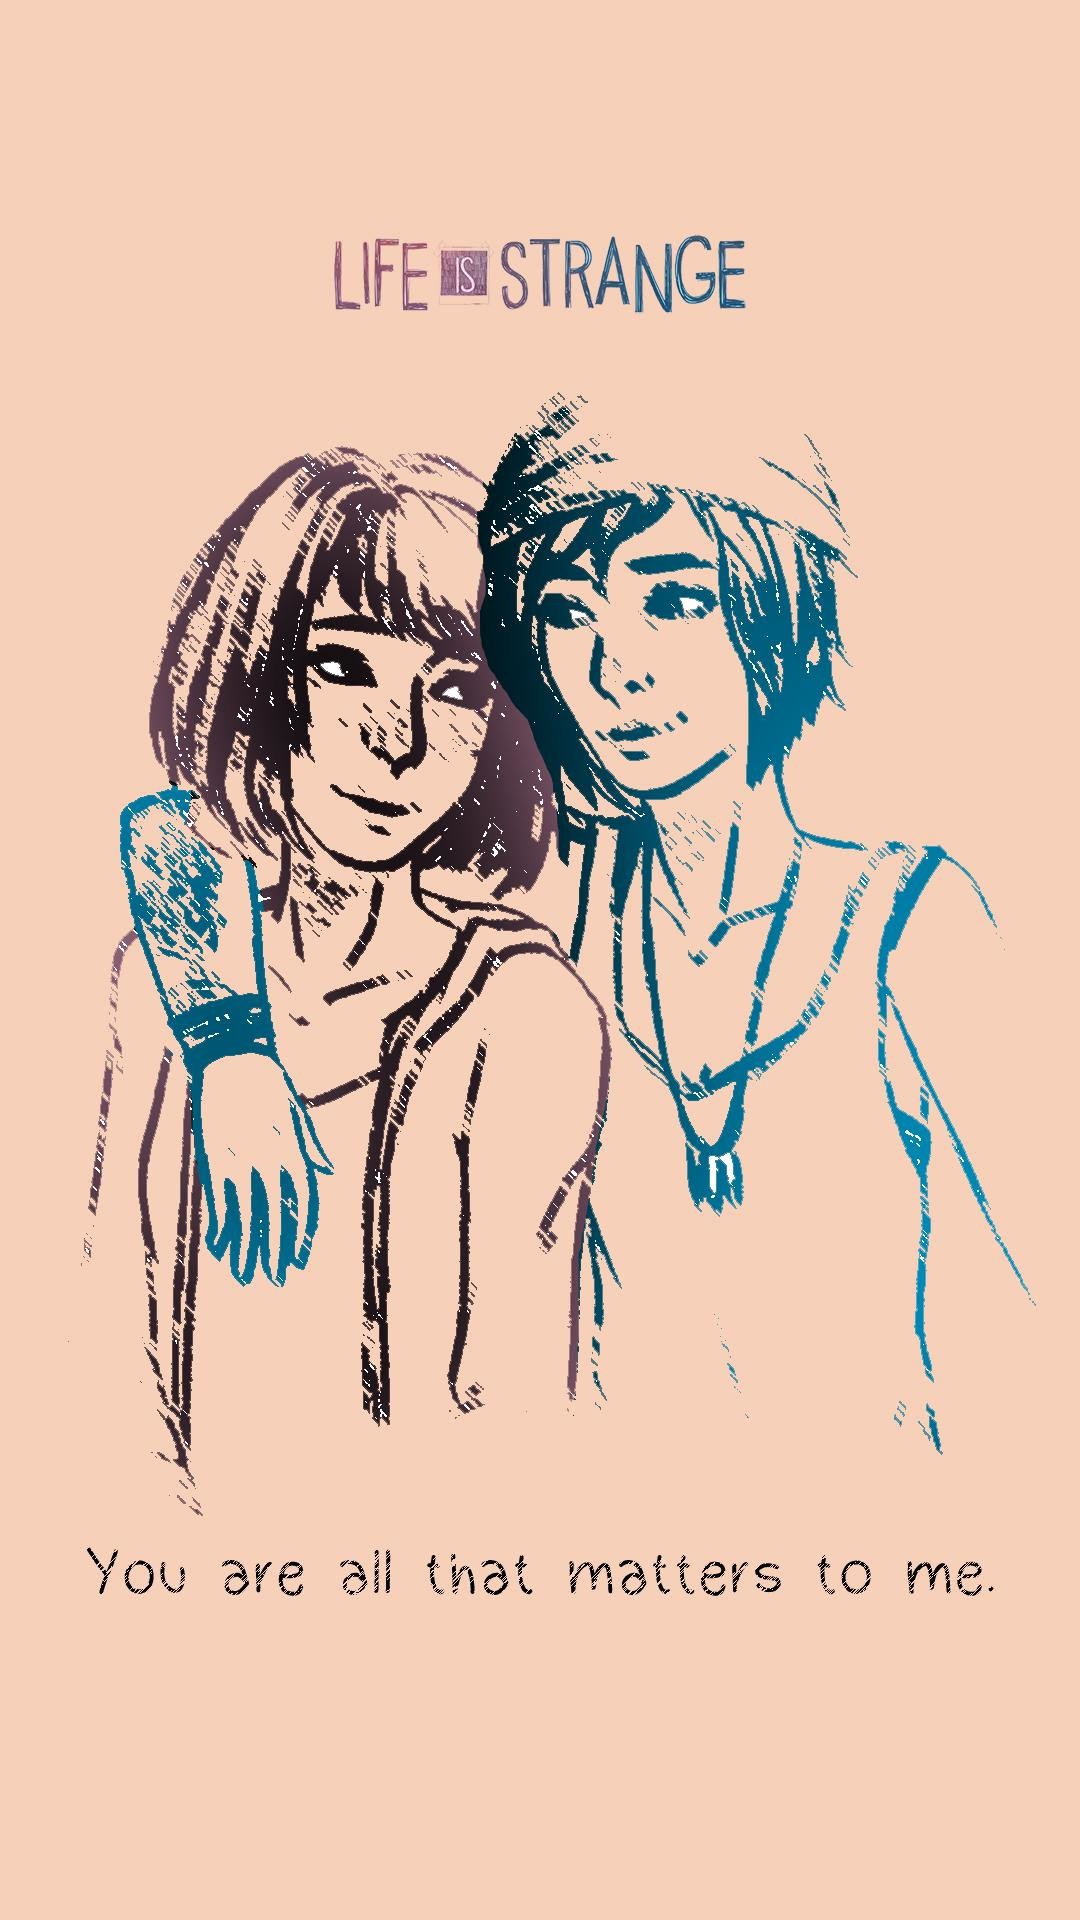 1080x1920 [ALL] Decided to do a phone wallpaper based on yesterday's daily Pricefield.